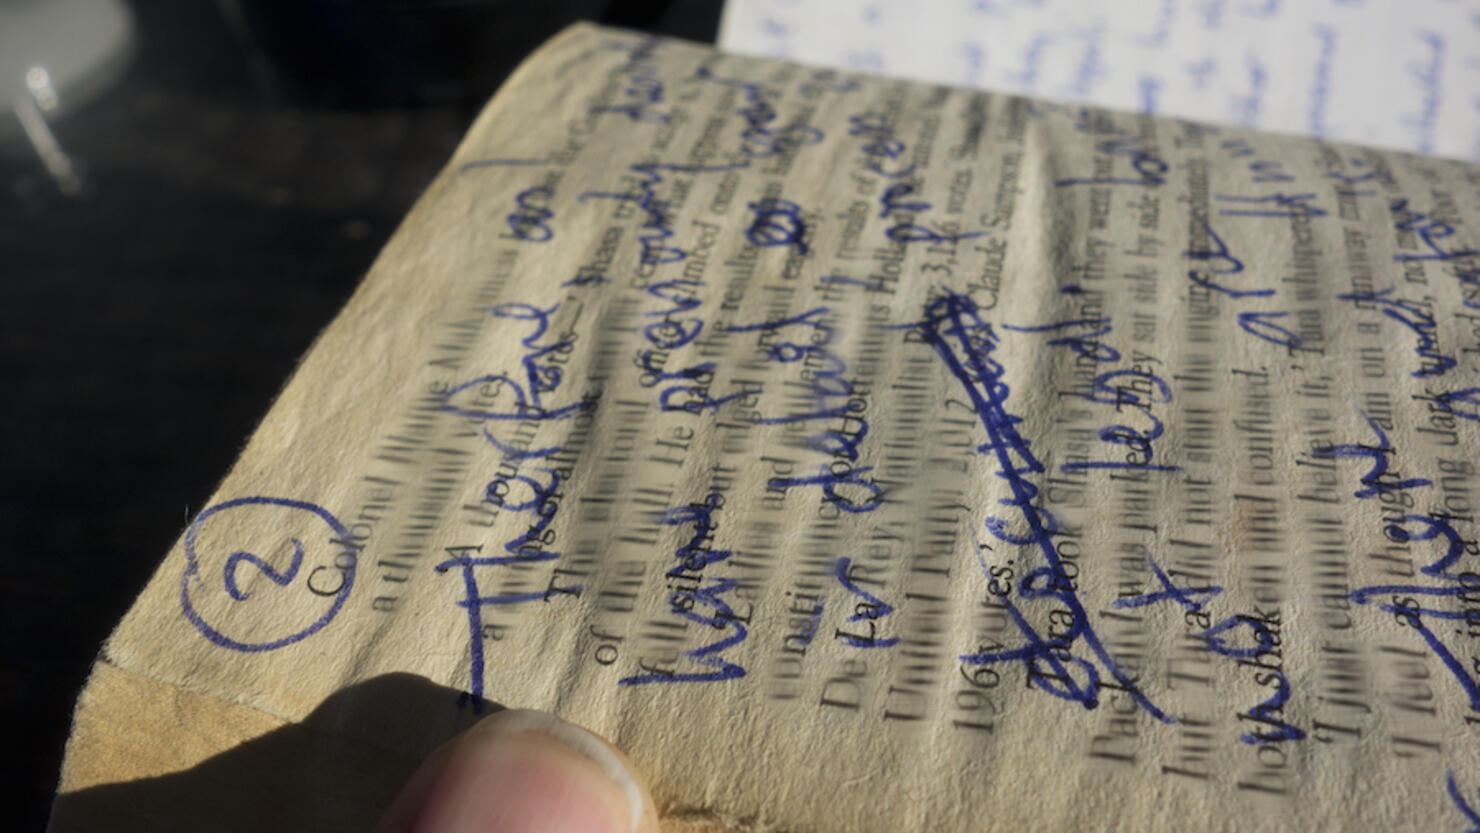 Europe, Greece, View Of Handwritten Notes (To Do List) On Pages Of Printed Book